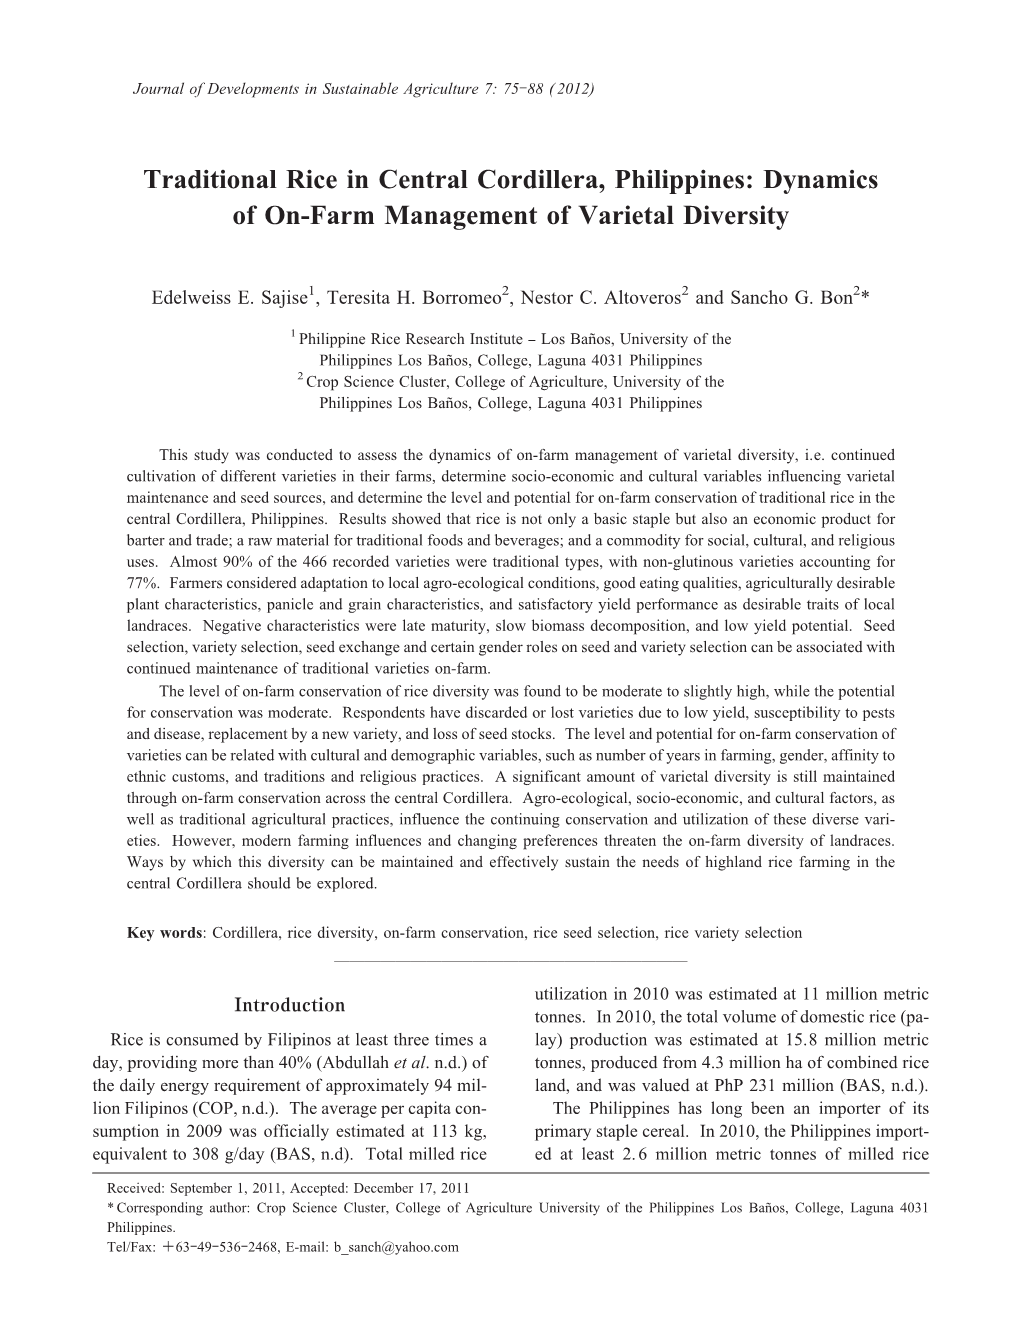 Traditional Rice in Central Cordillera, Philippines: Dynamics of On-Farm Management of Varietal Diversity